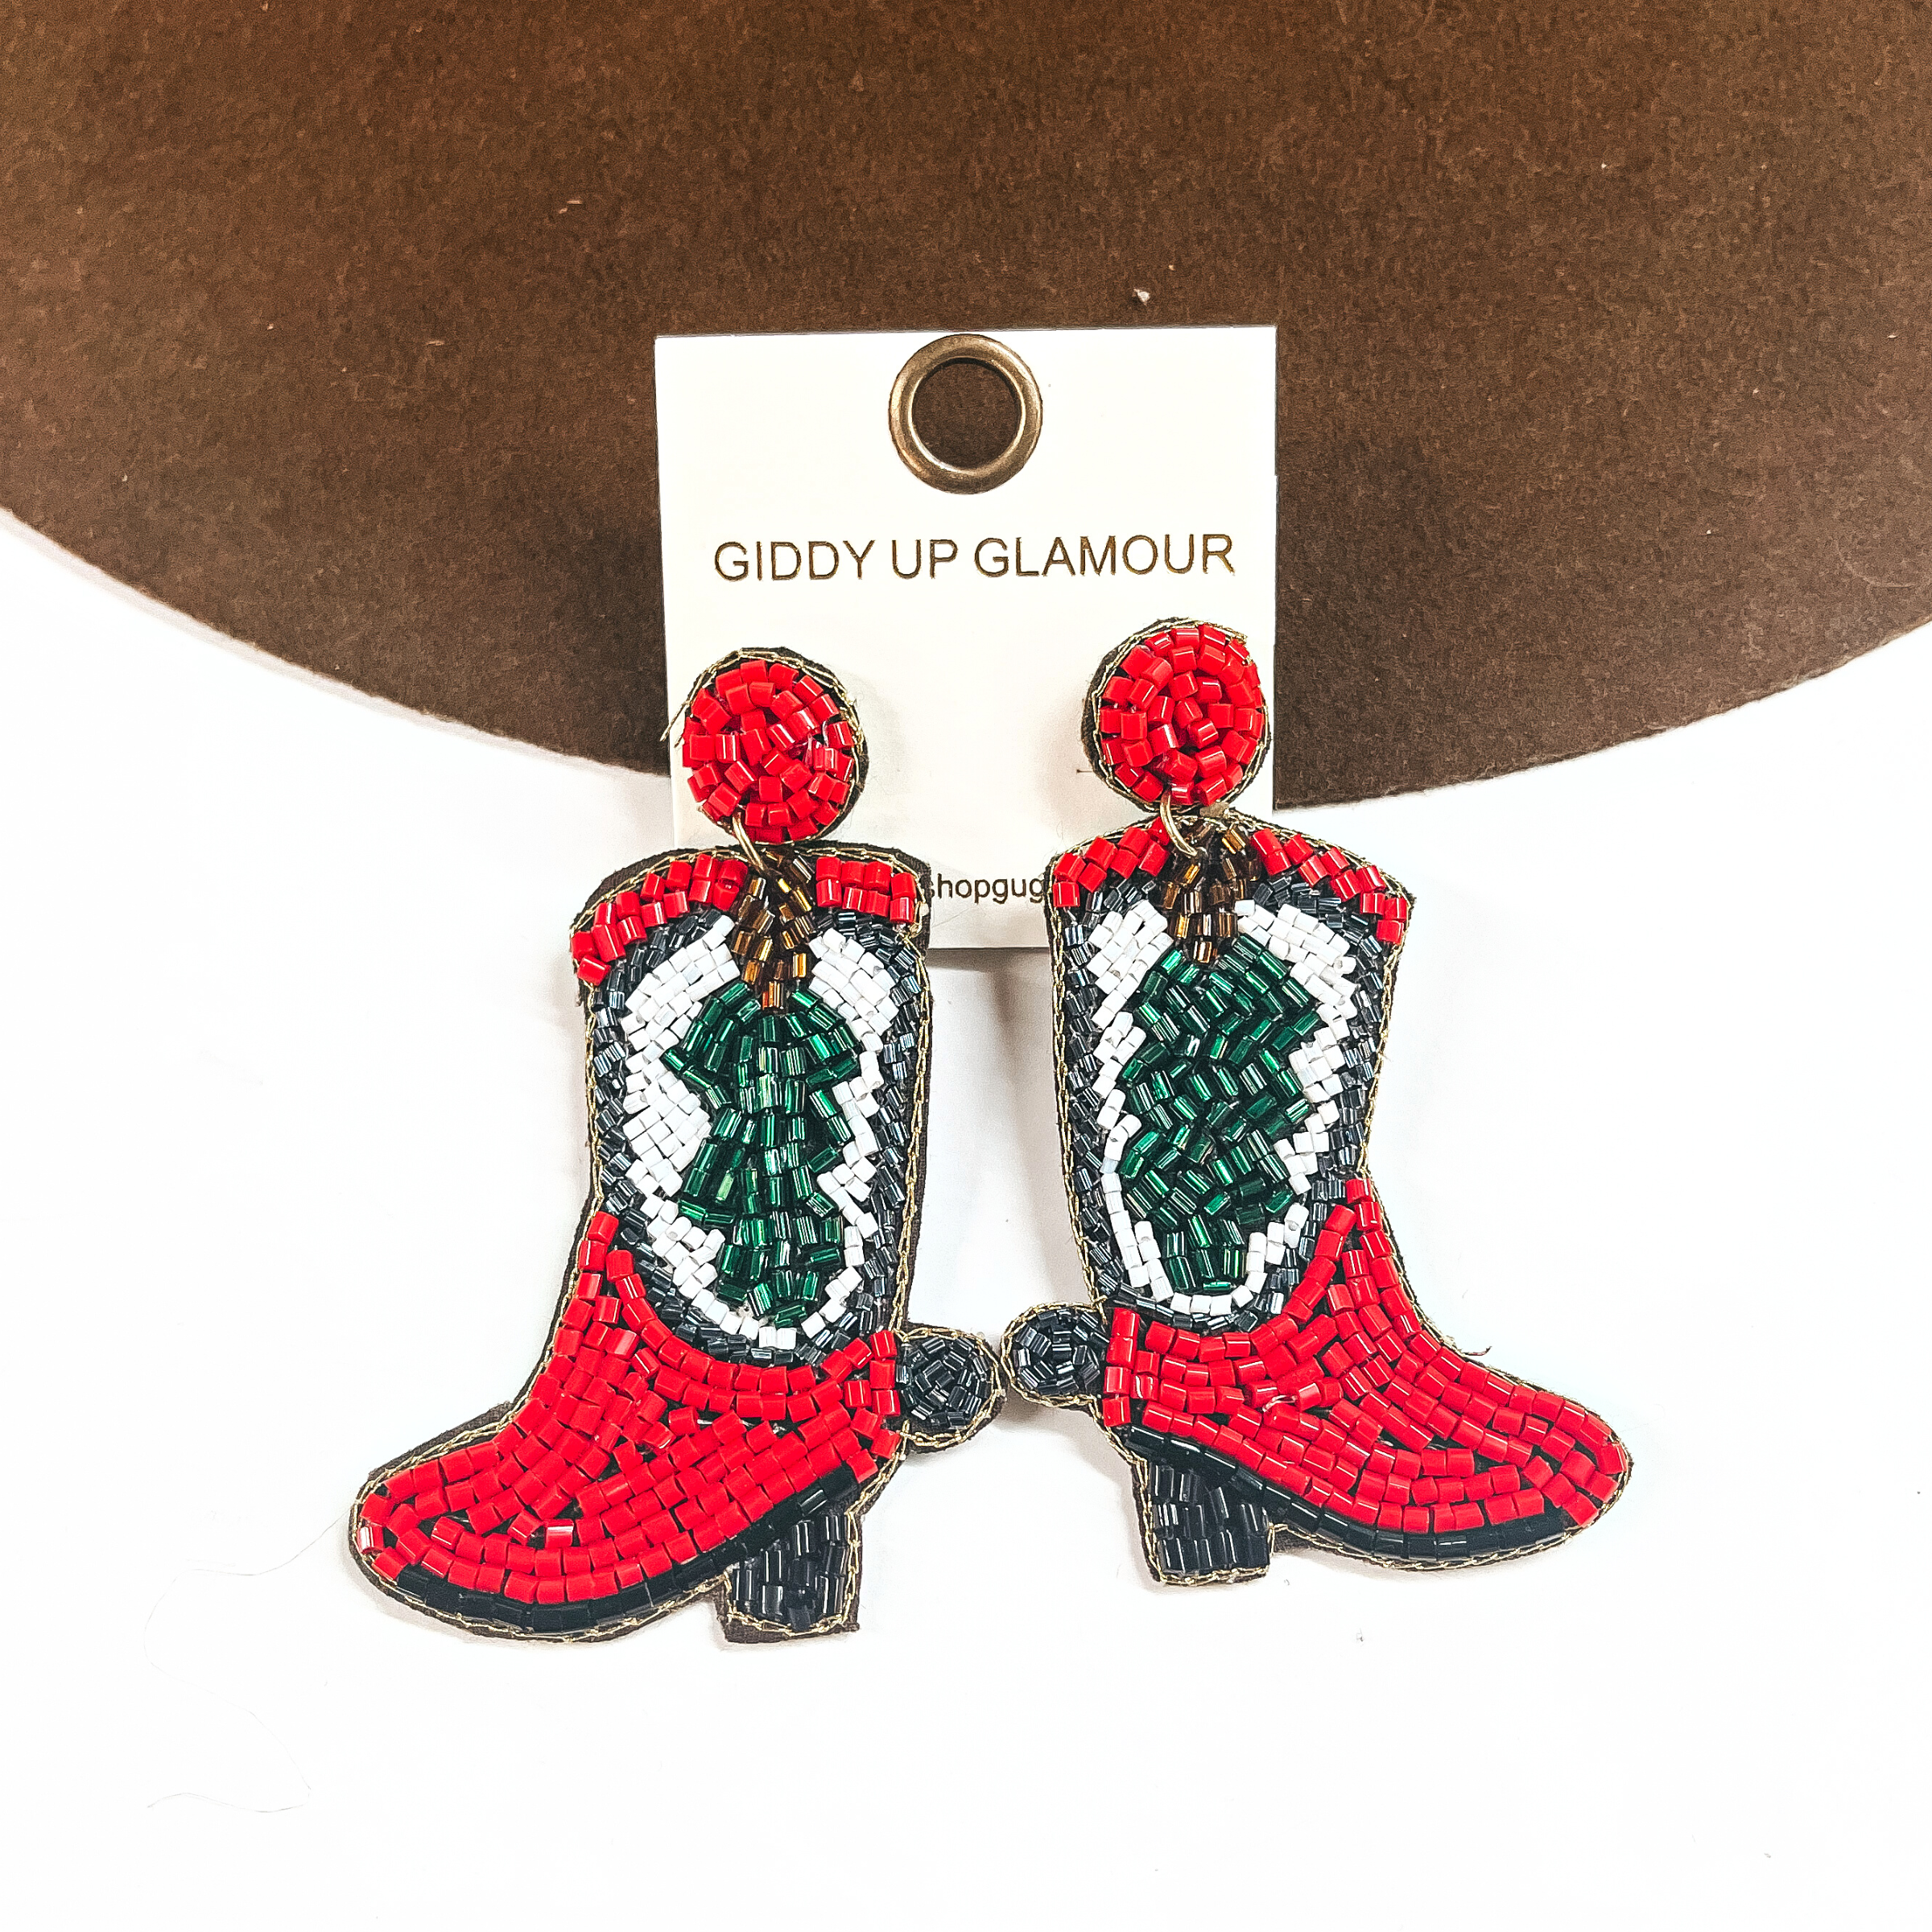 These are beaded Christmas boot earrings in red, white, black, green, brown, and gray. It has a red postback with a boot drop in red, the calf part of the boot has a beaded tree in a white background, and has a black sole. These earrings are taken leaning against a dark brown felt hat and on a white background.